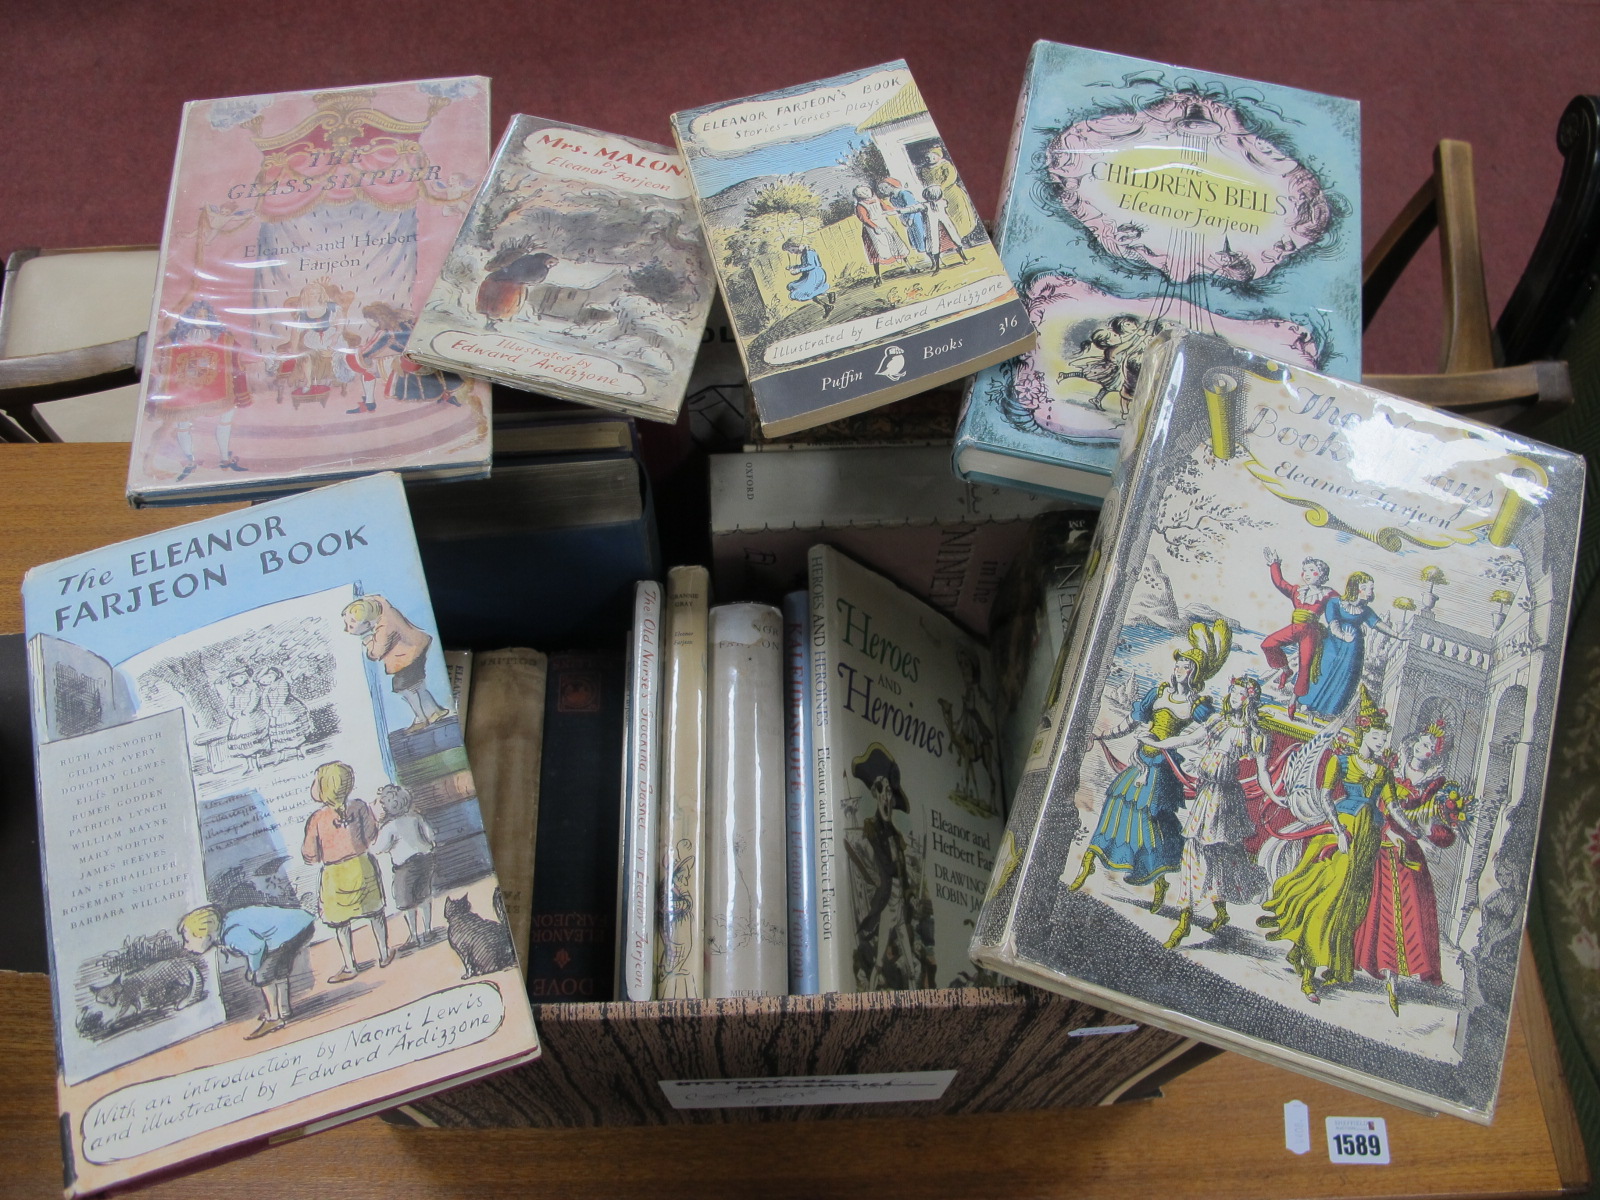 A Collection of Books by and Relating to the Author Eleanor Farjean, including The Nursery in the